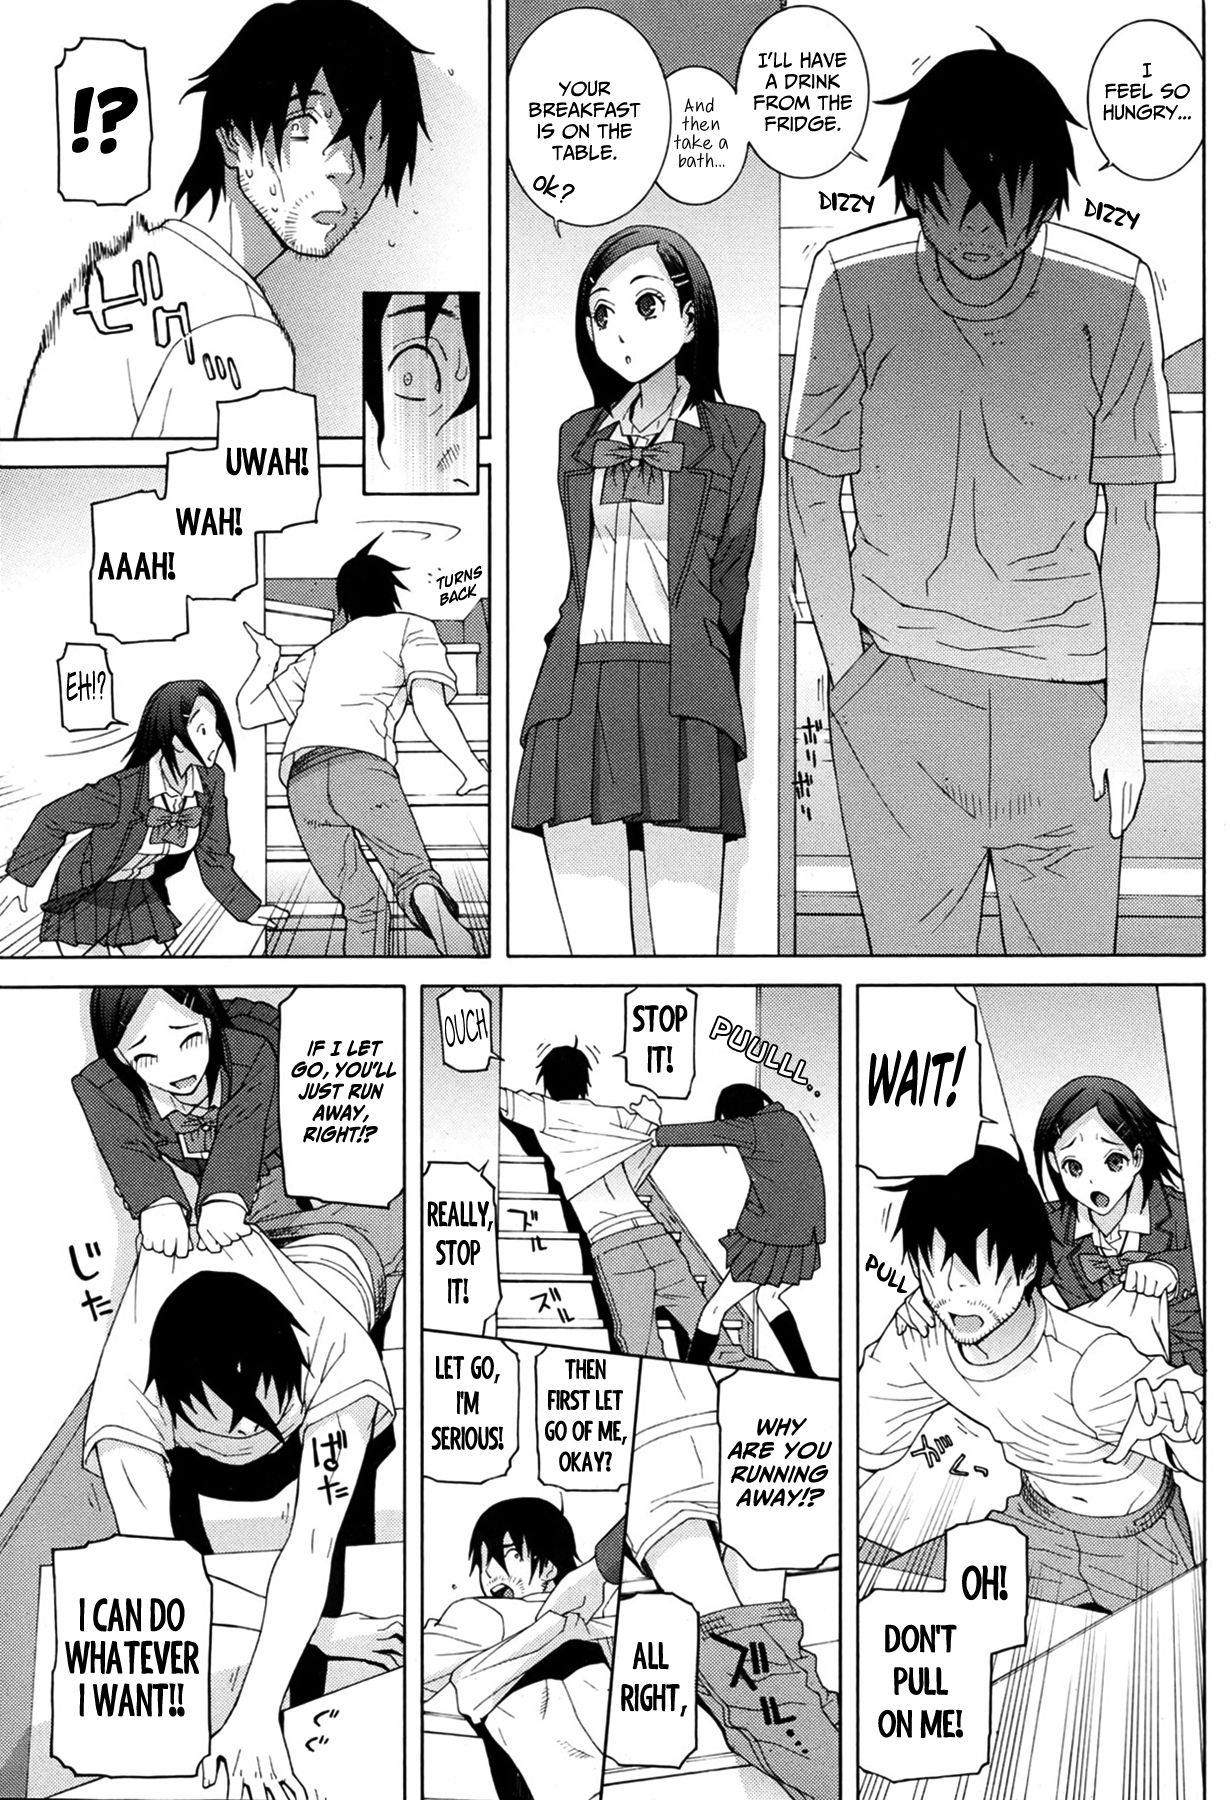 [Shinobu Tanei] The Motherly Instincts of a Step-sister 2 [English] {MumeiTL} 